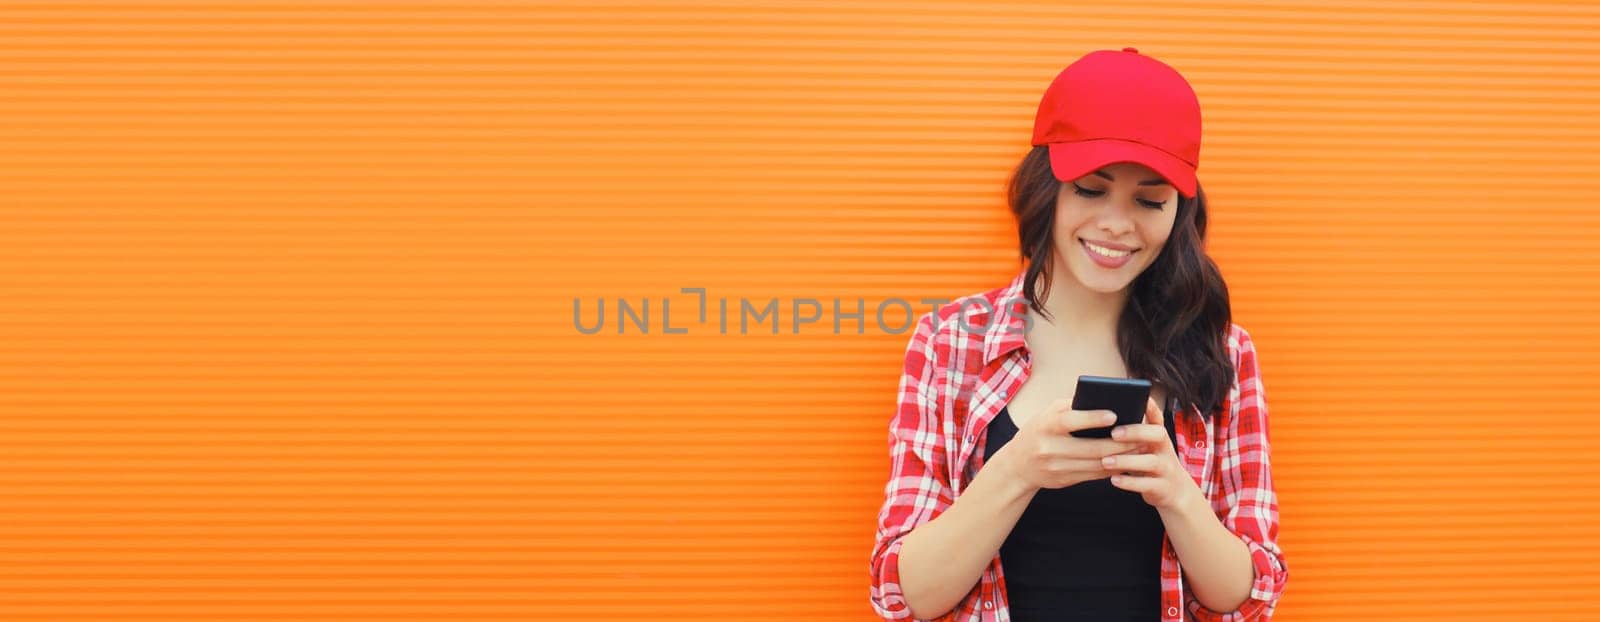 Portrait of happy smiling young woman with mobile phone in summer red baseball cap on colorful orange background, blank copy space for advertising text